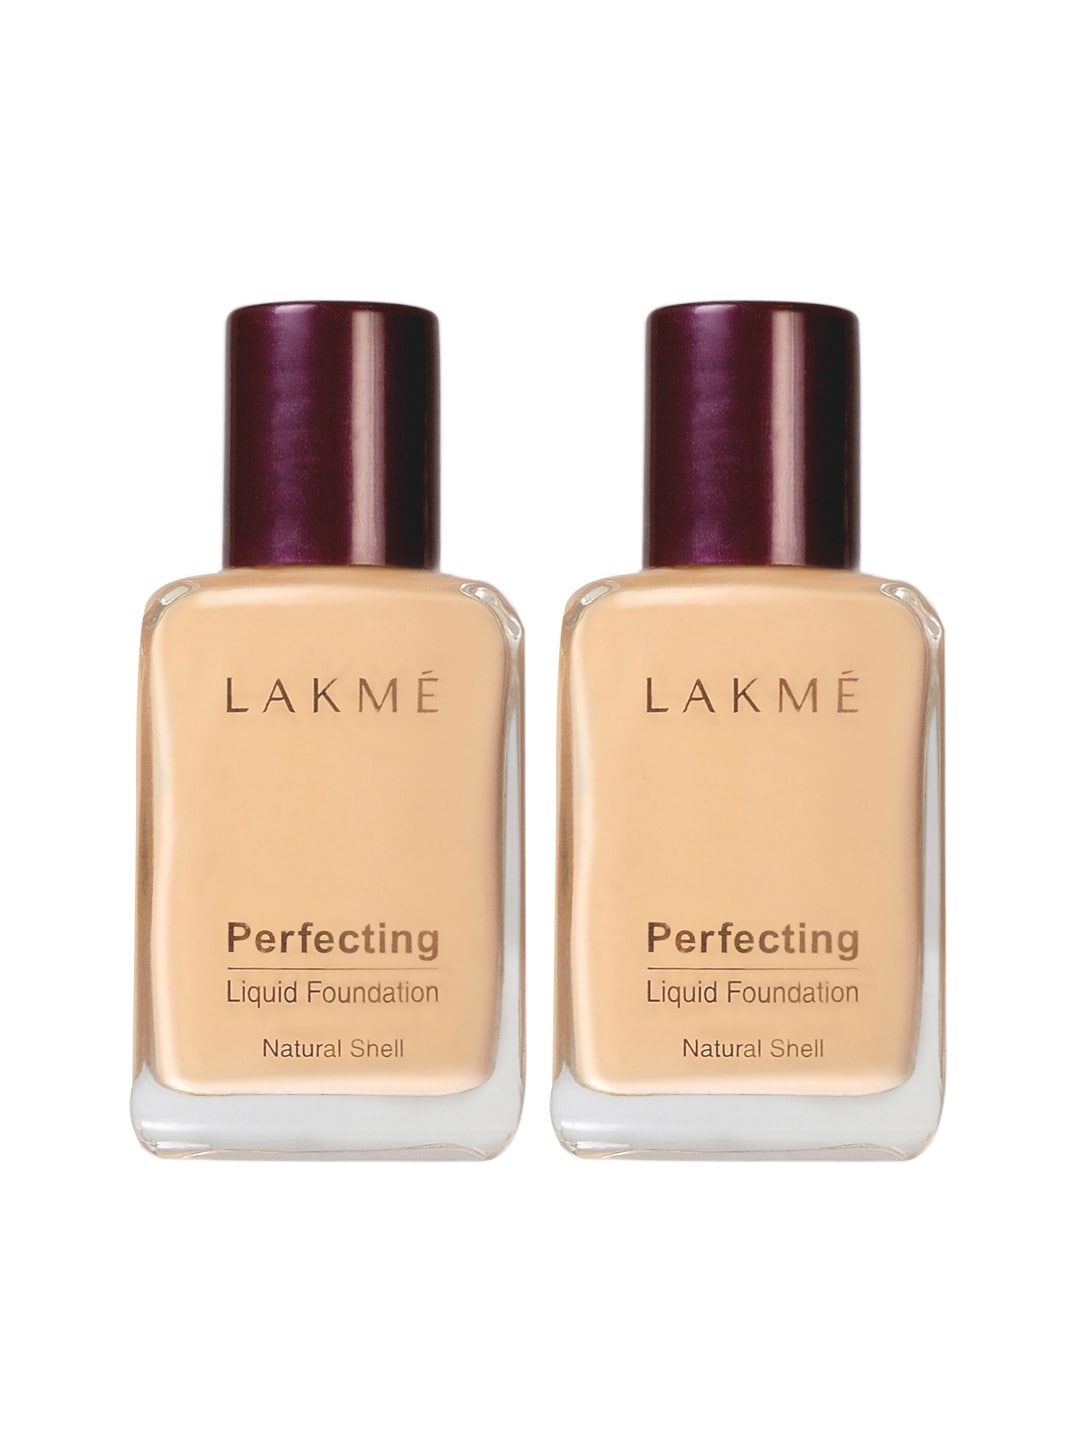 Lakme Set of 2 Perfecting Natural Coral Liquid Foundation Price in India